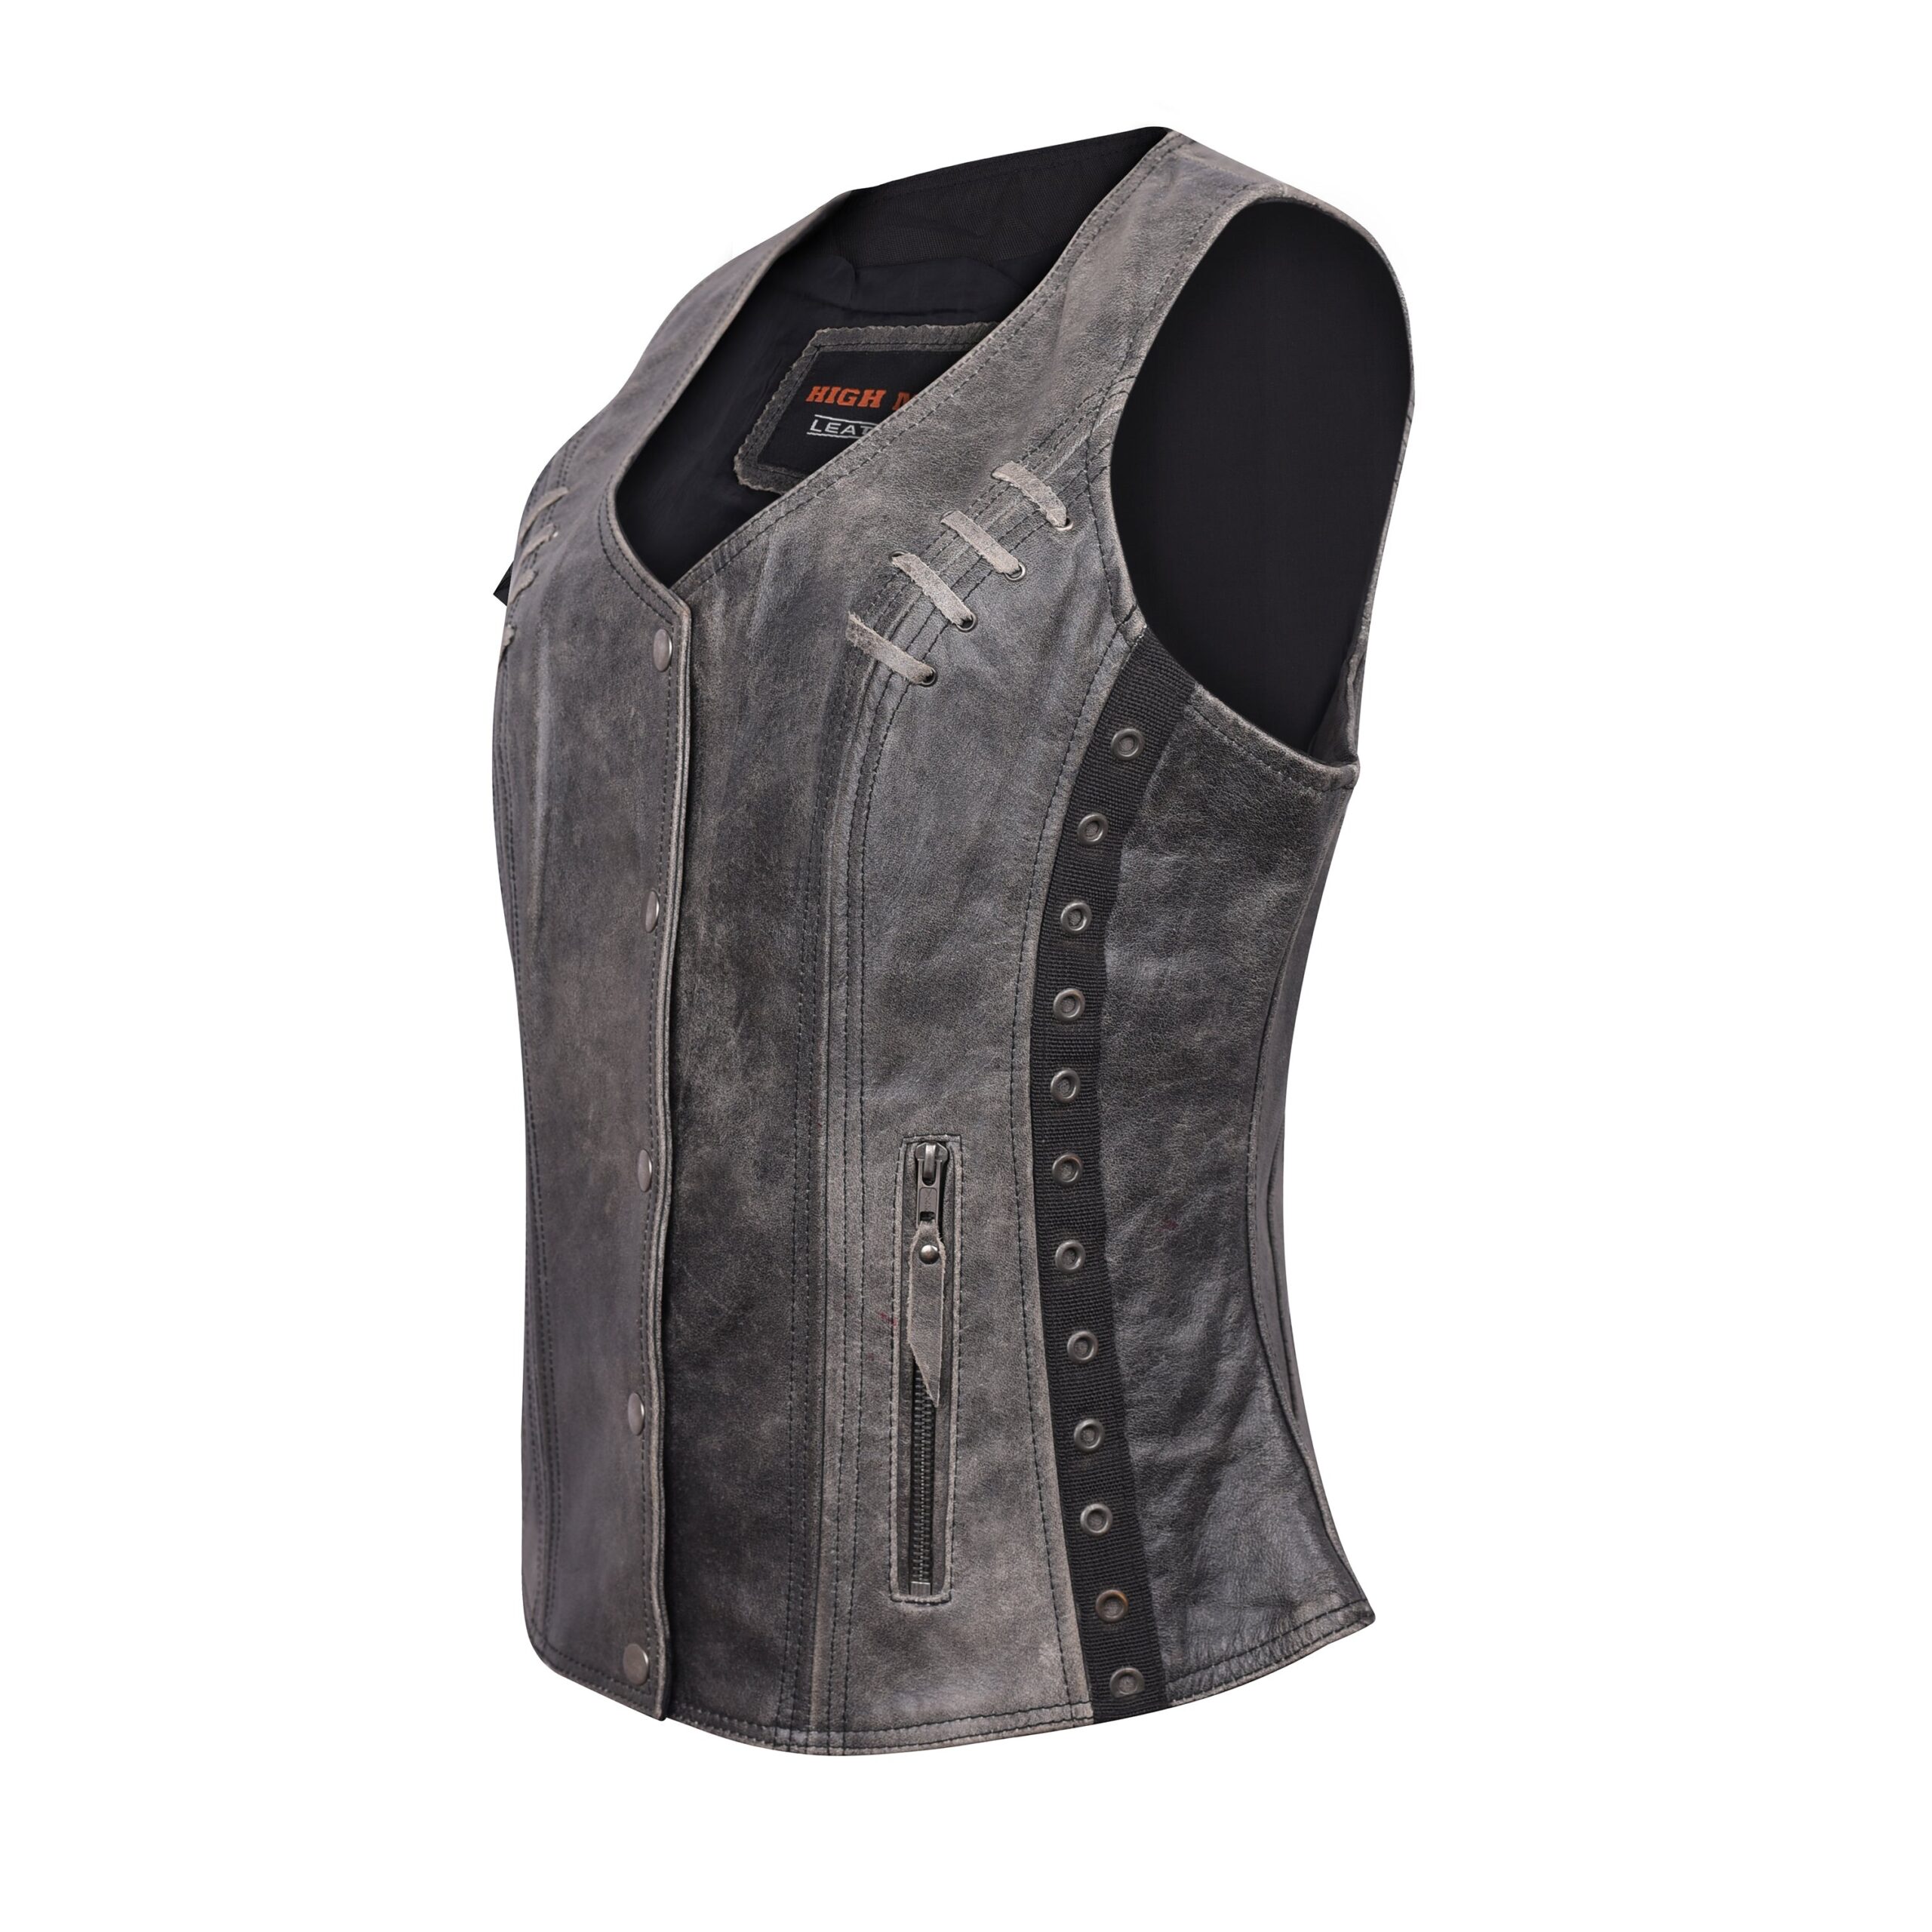 Shades of Sophistication: The Allure of a Gray leather biker vest